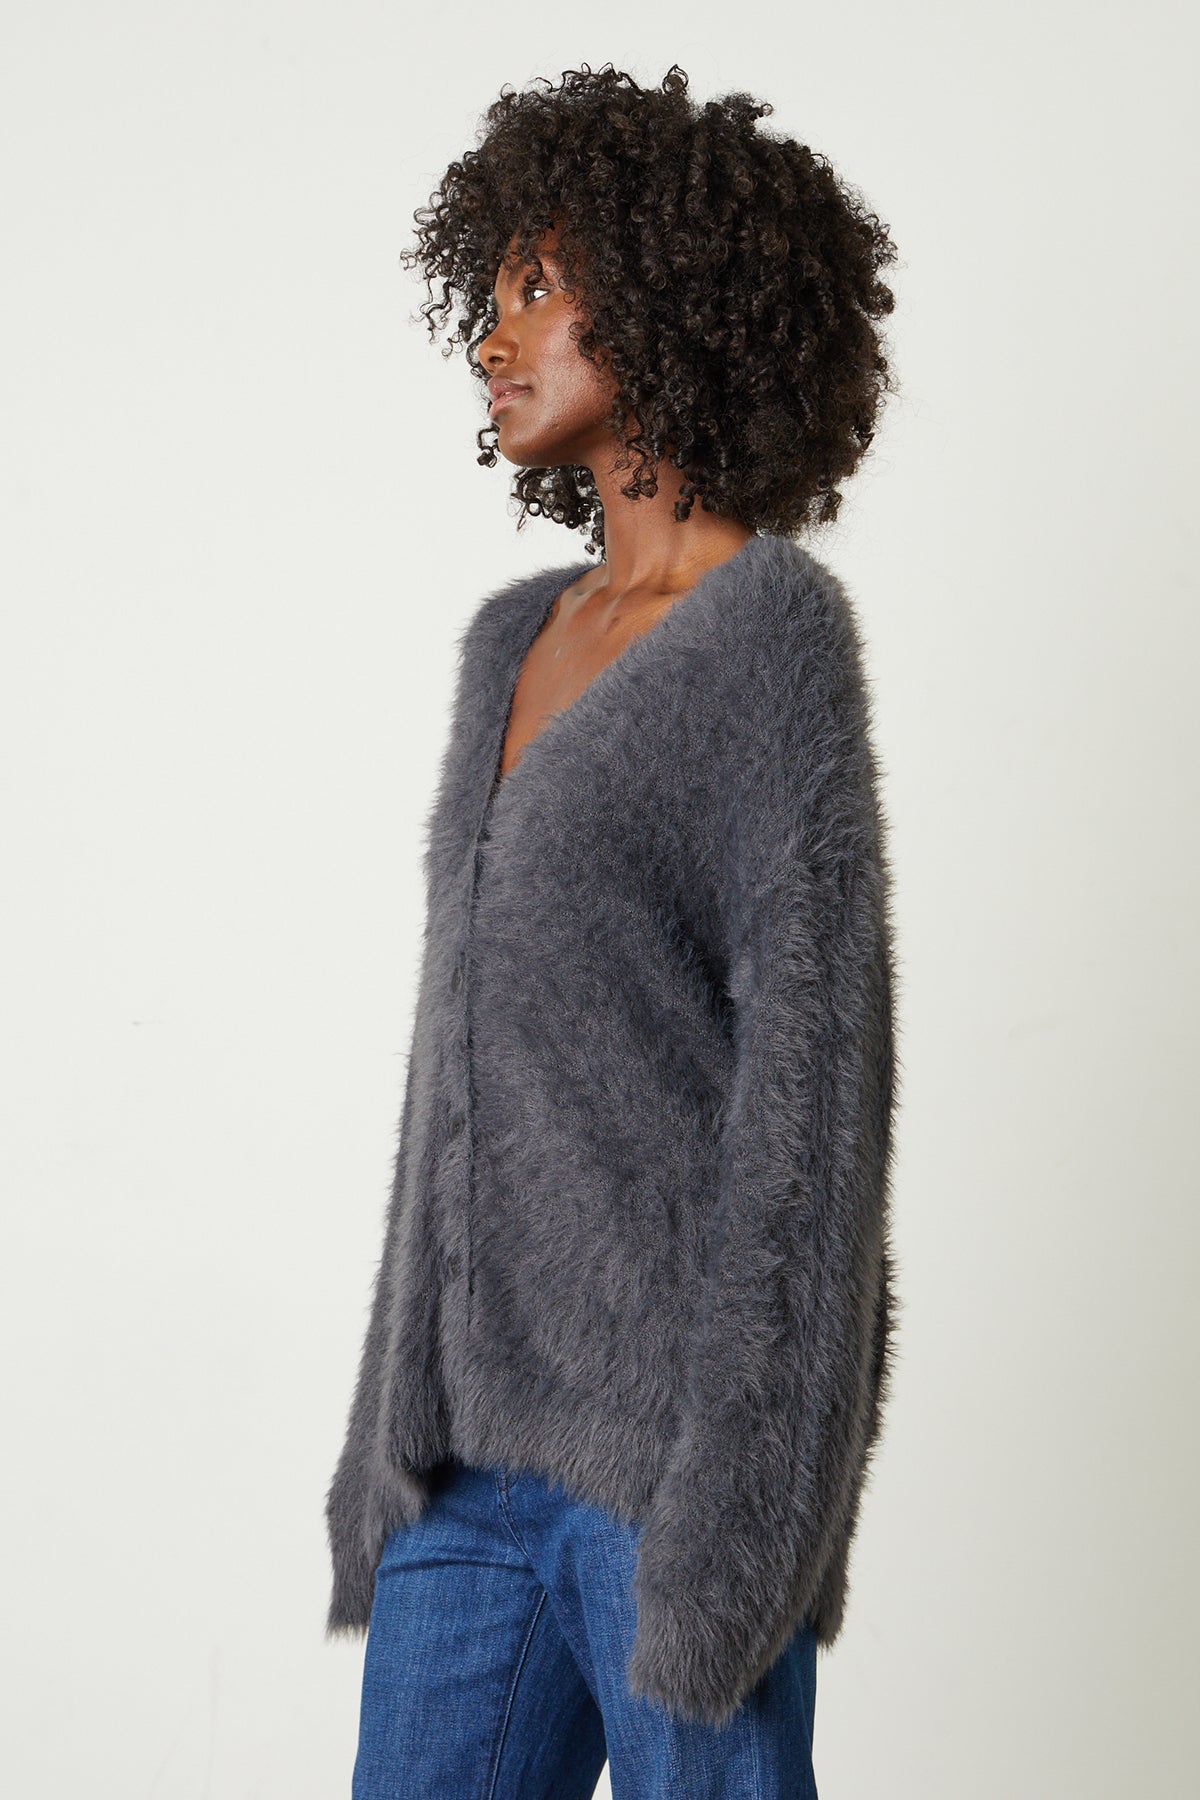   The model is wearing a Velvet by Graham & Spencer BARB FEATHER YARN BUTTON FRONT CARDIGAN. 